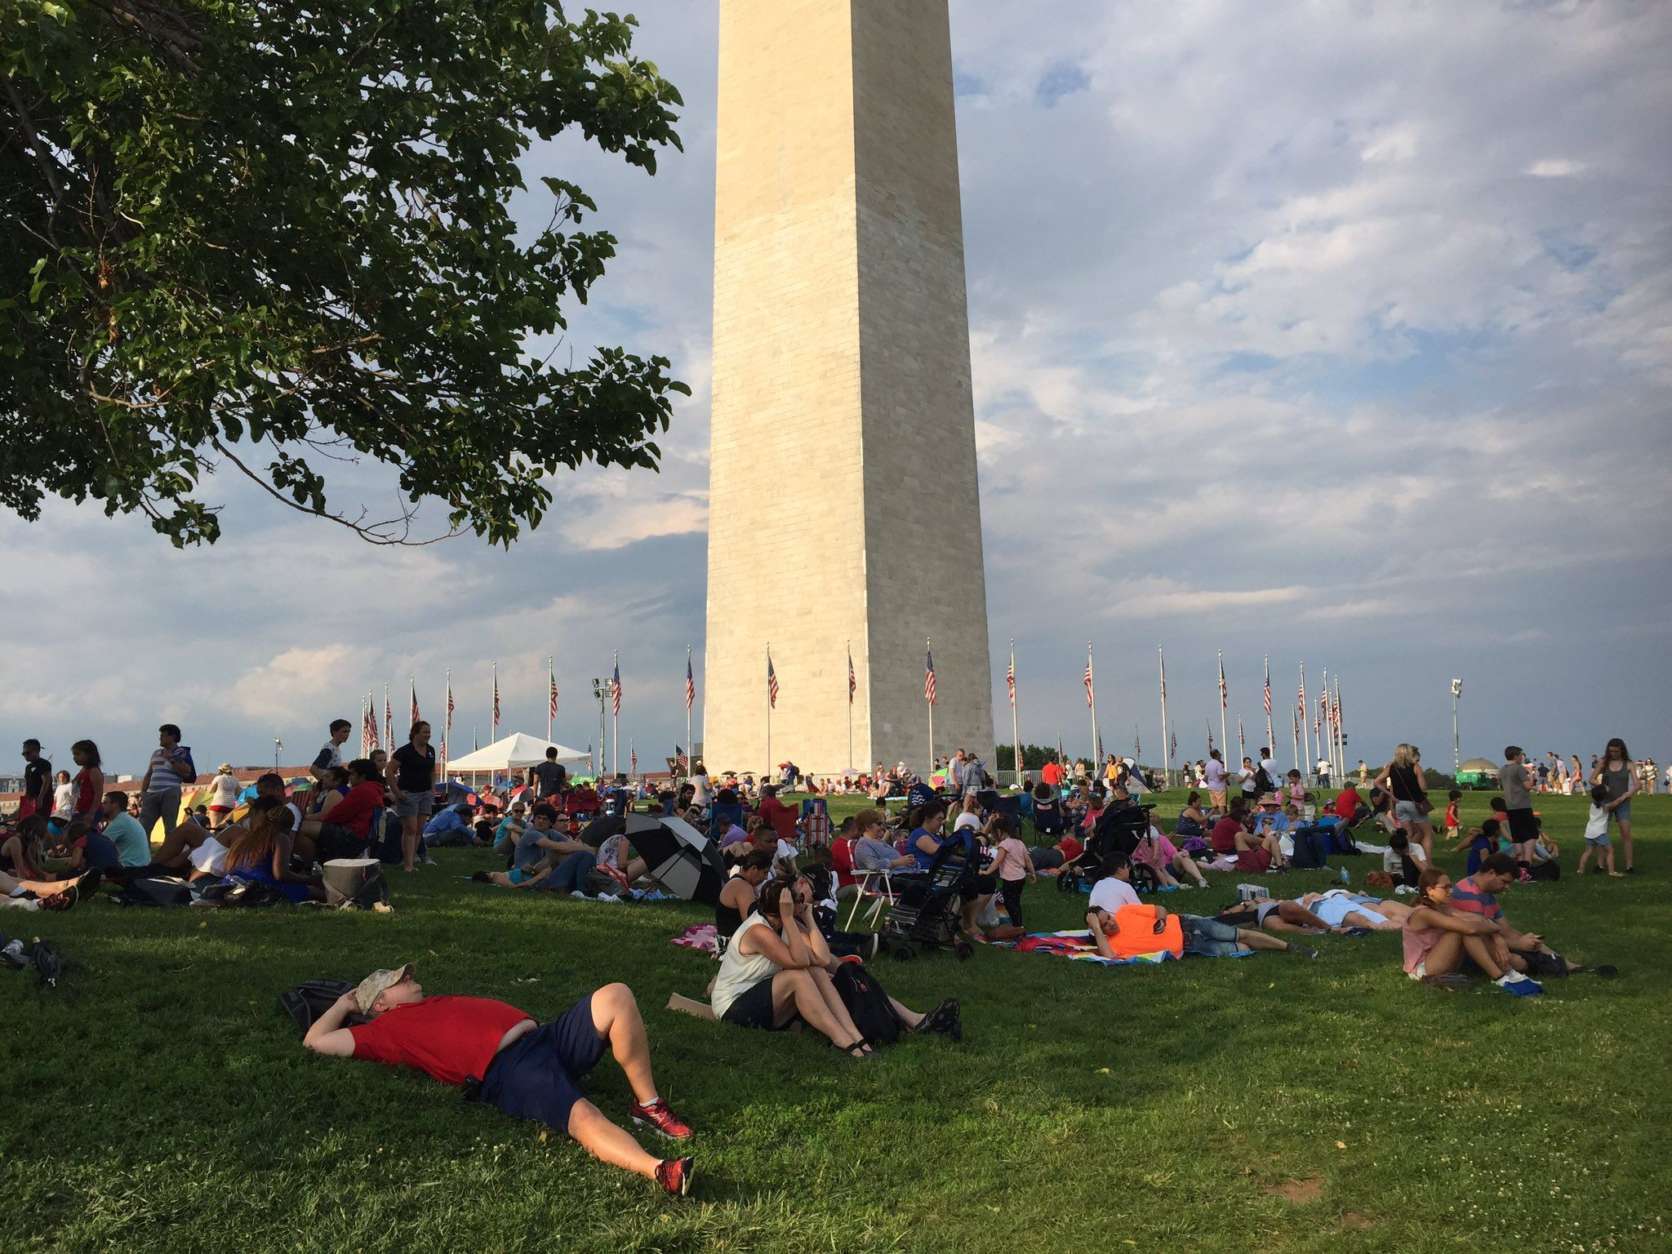 Some spectators near the Washington Monument were lucky enough to find shade. (WTOP/Michelle Basch)